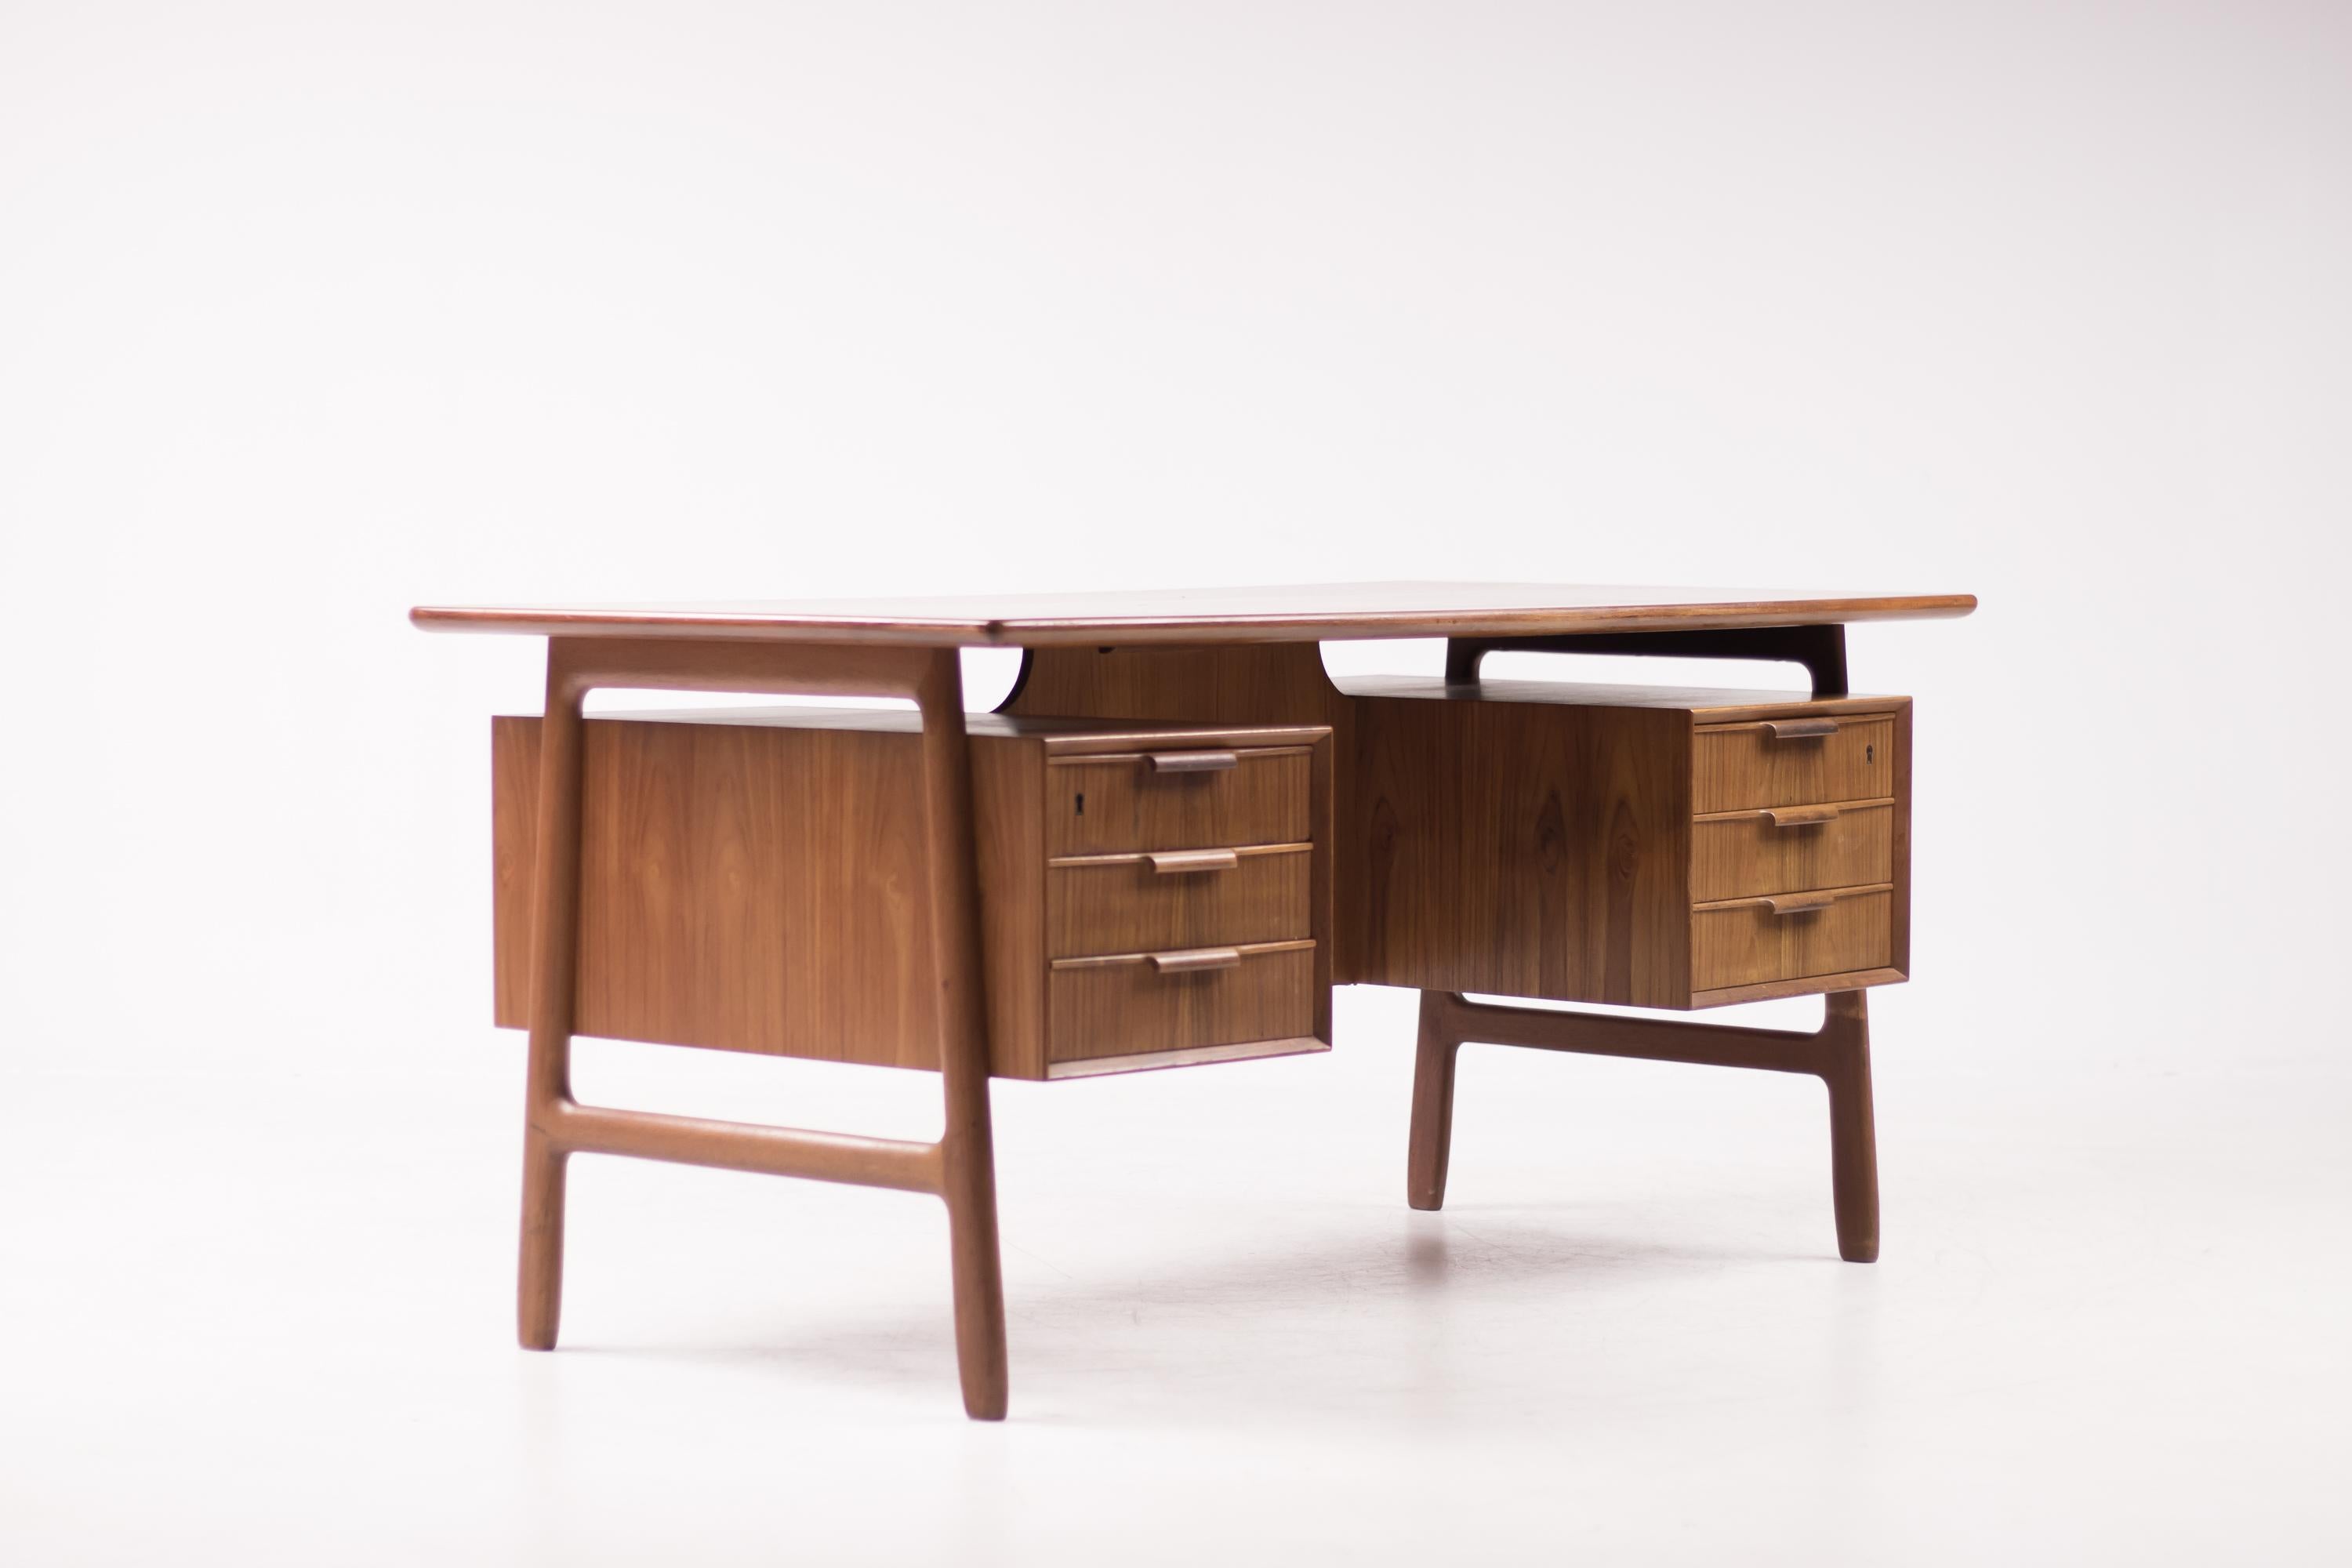 Teak writing desk designed by Gunni Omann for Omann Jun Mobelfabrik Denmark.
Perfectly suitable for free-standing use, with several compartments at the frontside of the desk. 
Though very modern in design, this desk has many beautifully carved